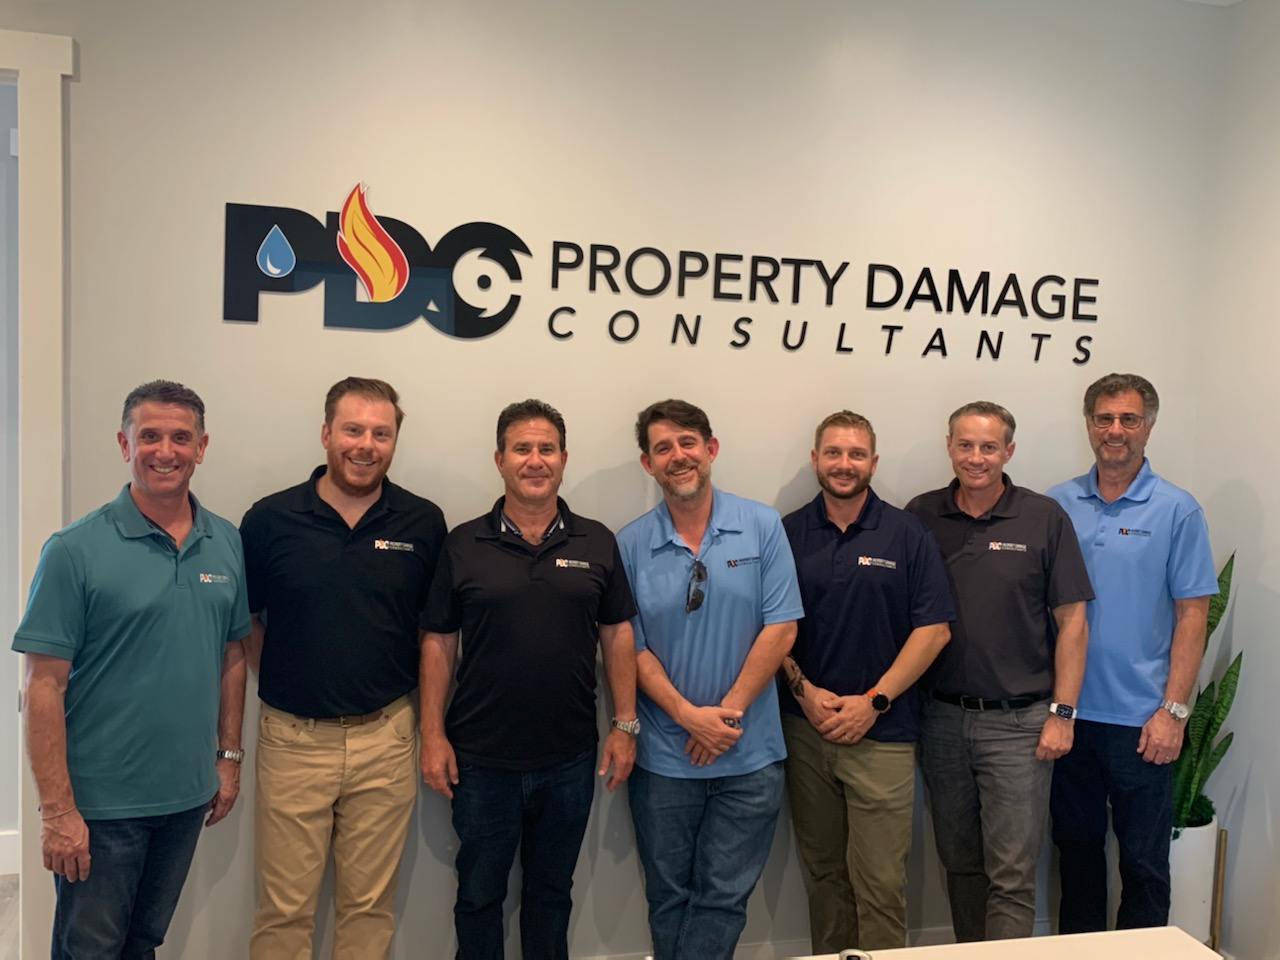 PROPERTY DAMAGE CONSULTANTS